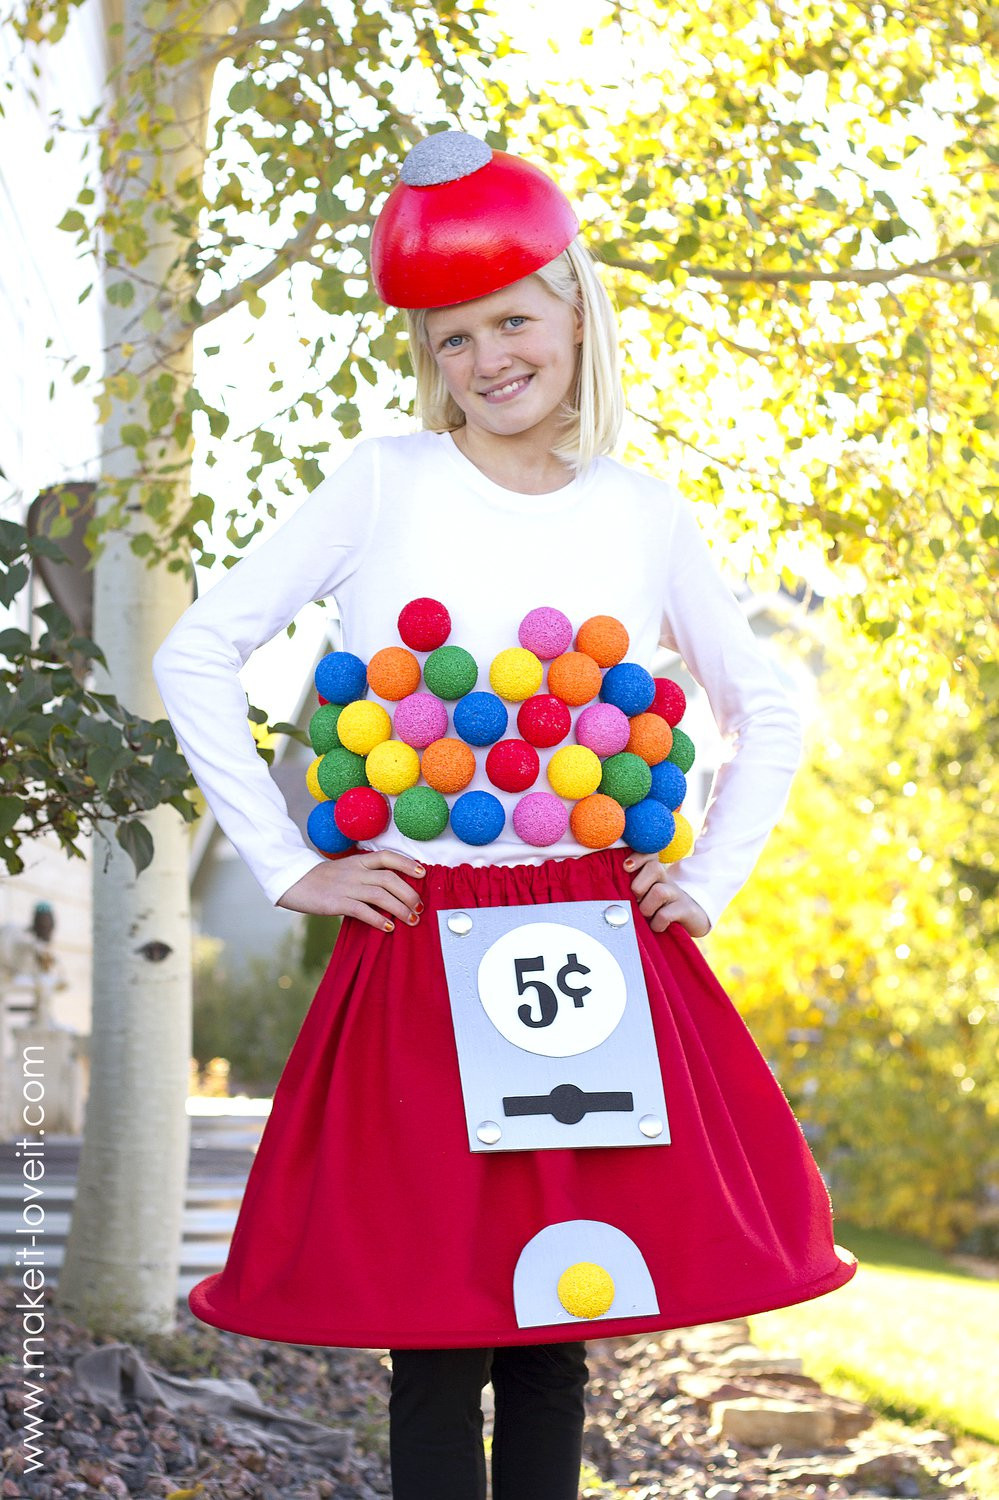 Halloween Costumes DIY
 The 15 Best DIY Halloween Costumes for Adults